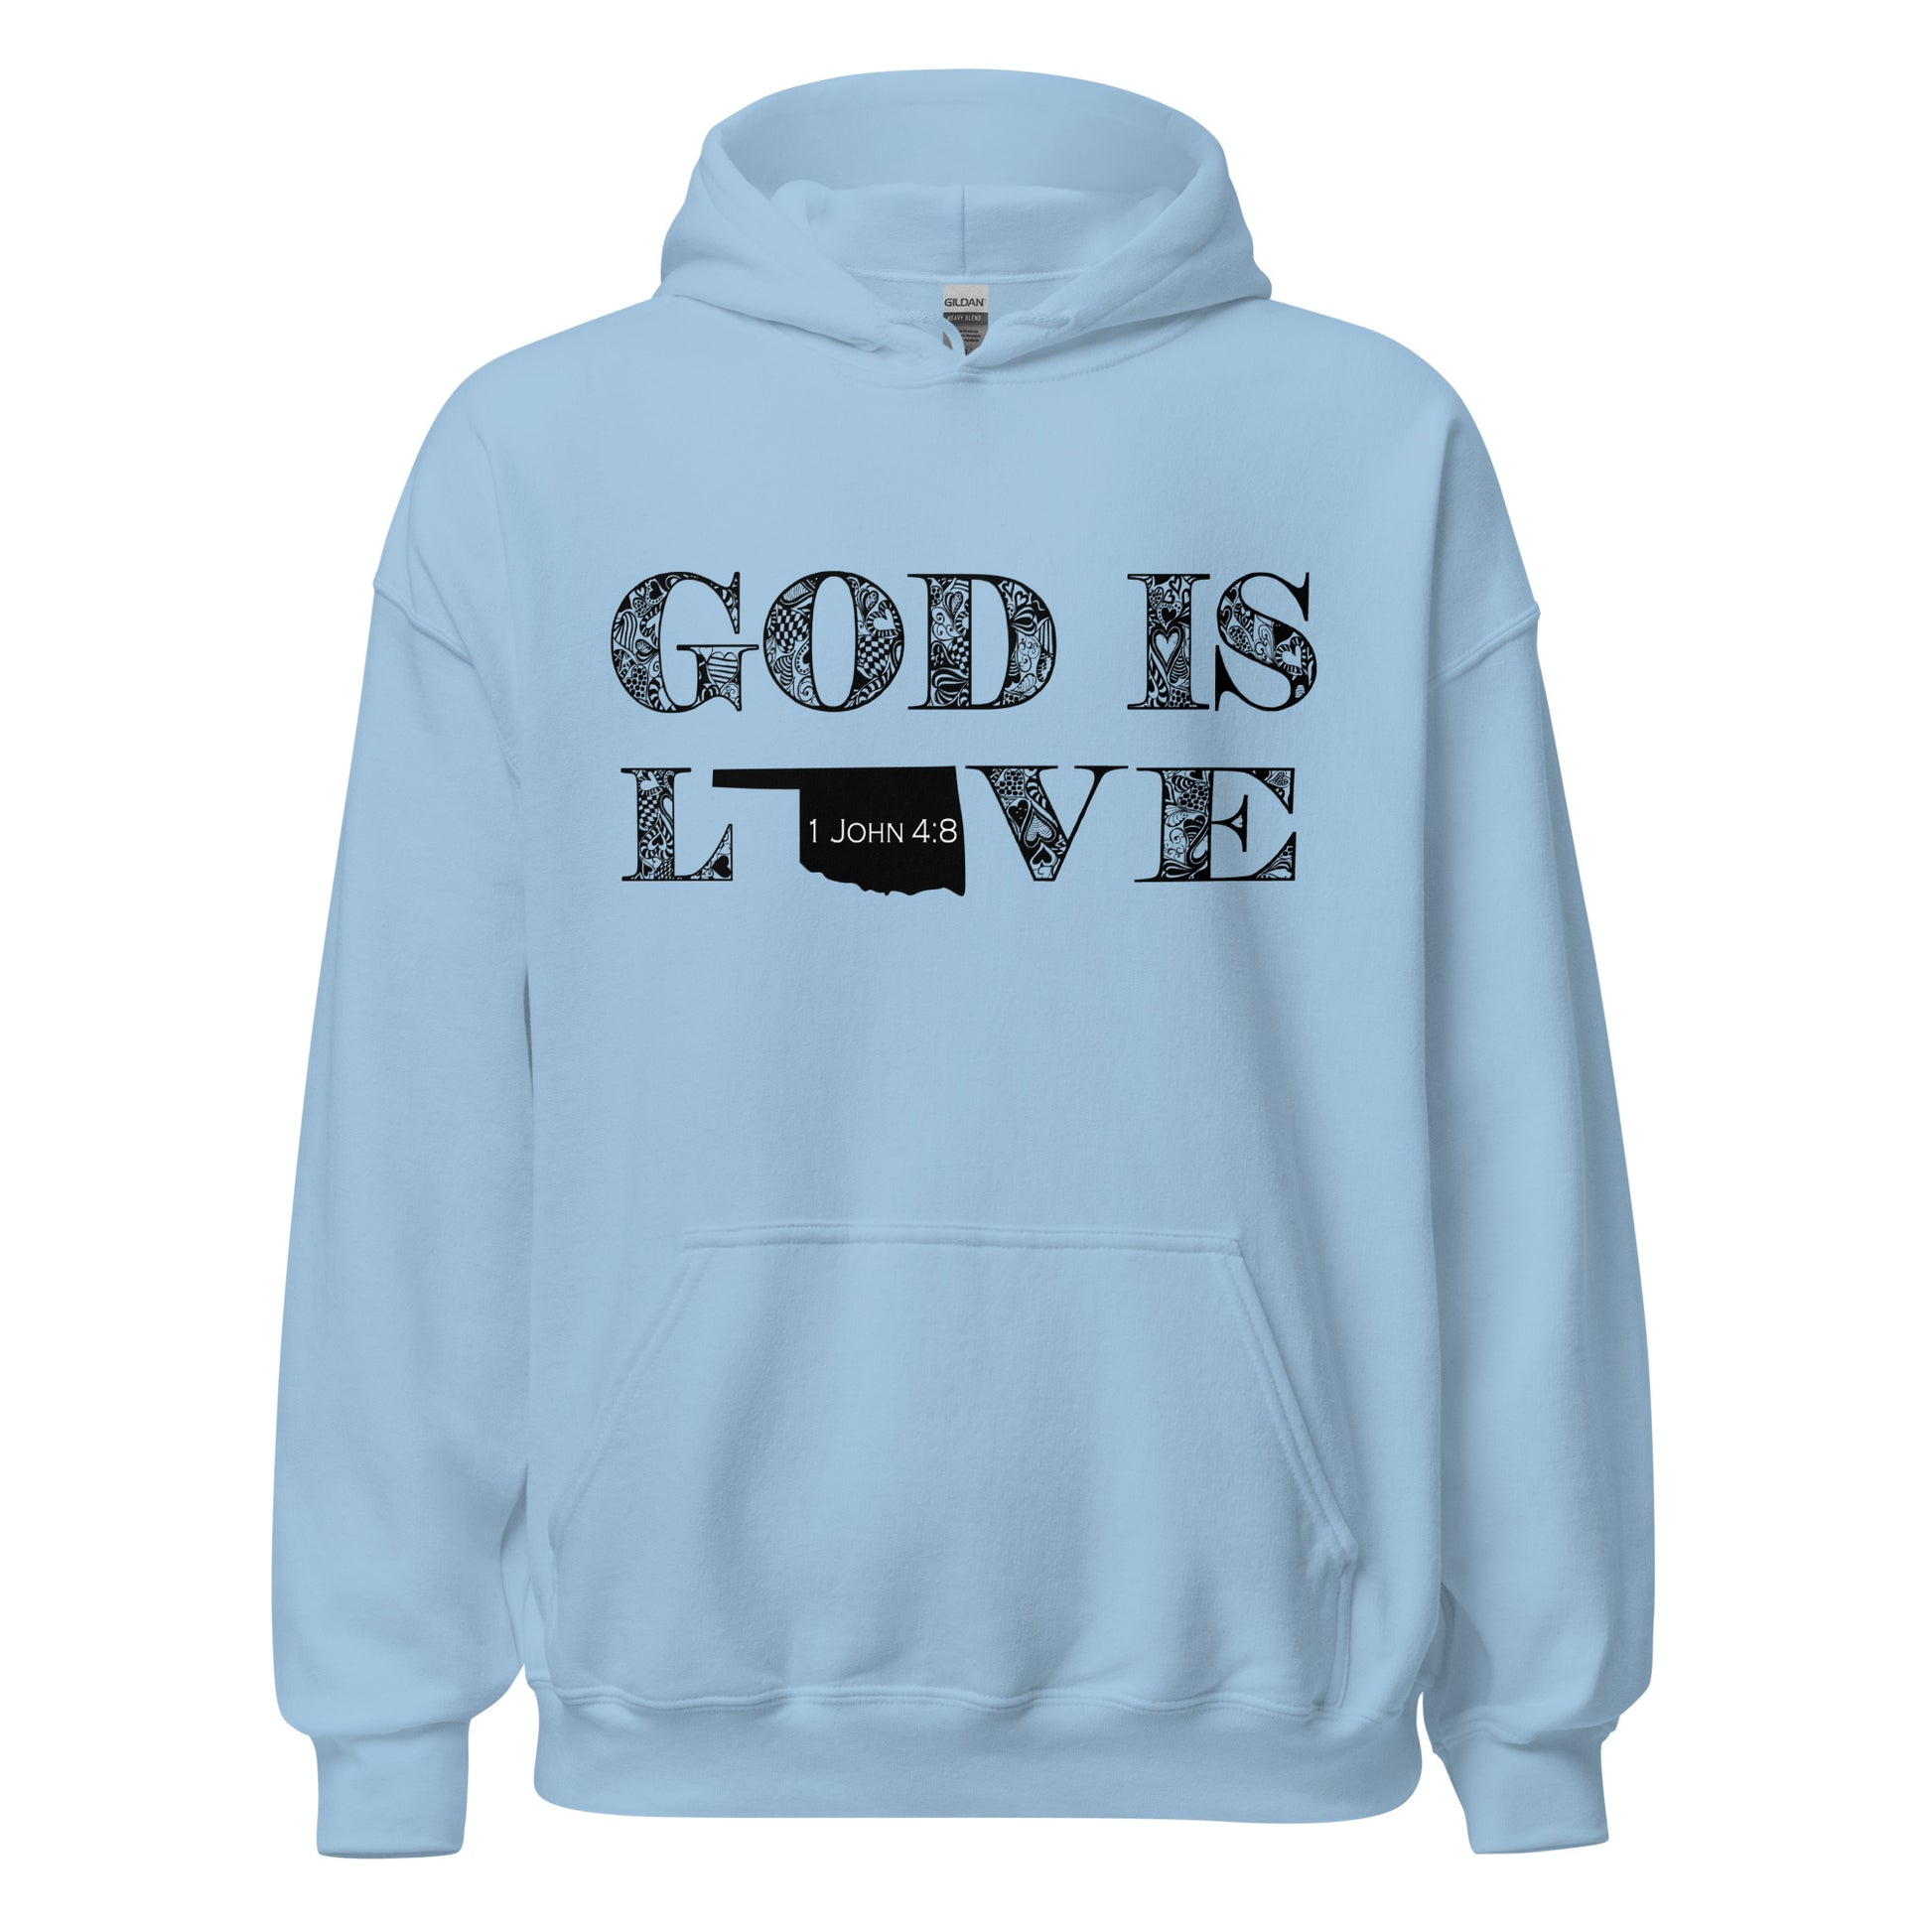 1 John 4:8 God Is Love Unisex Oklahoma Hoodie in Light Blue - front view with hood down